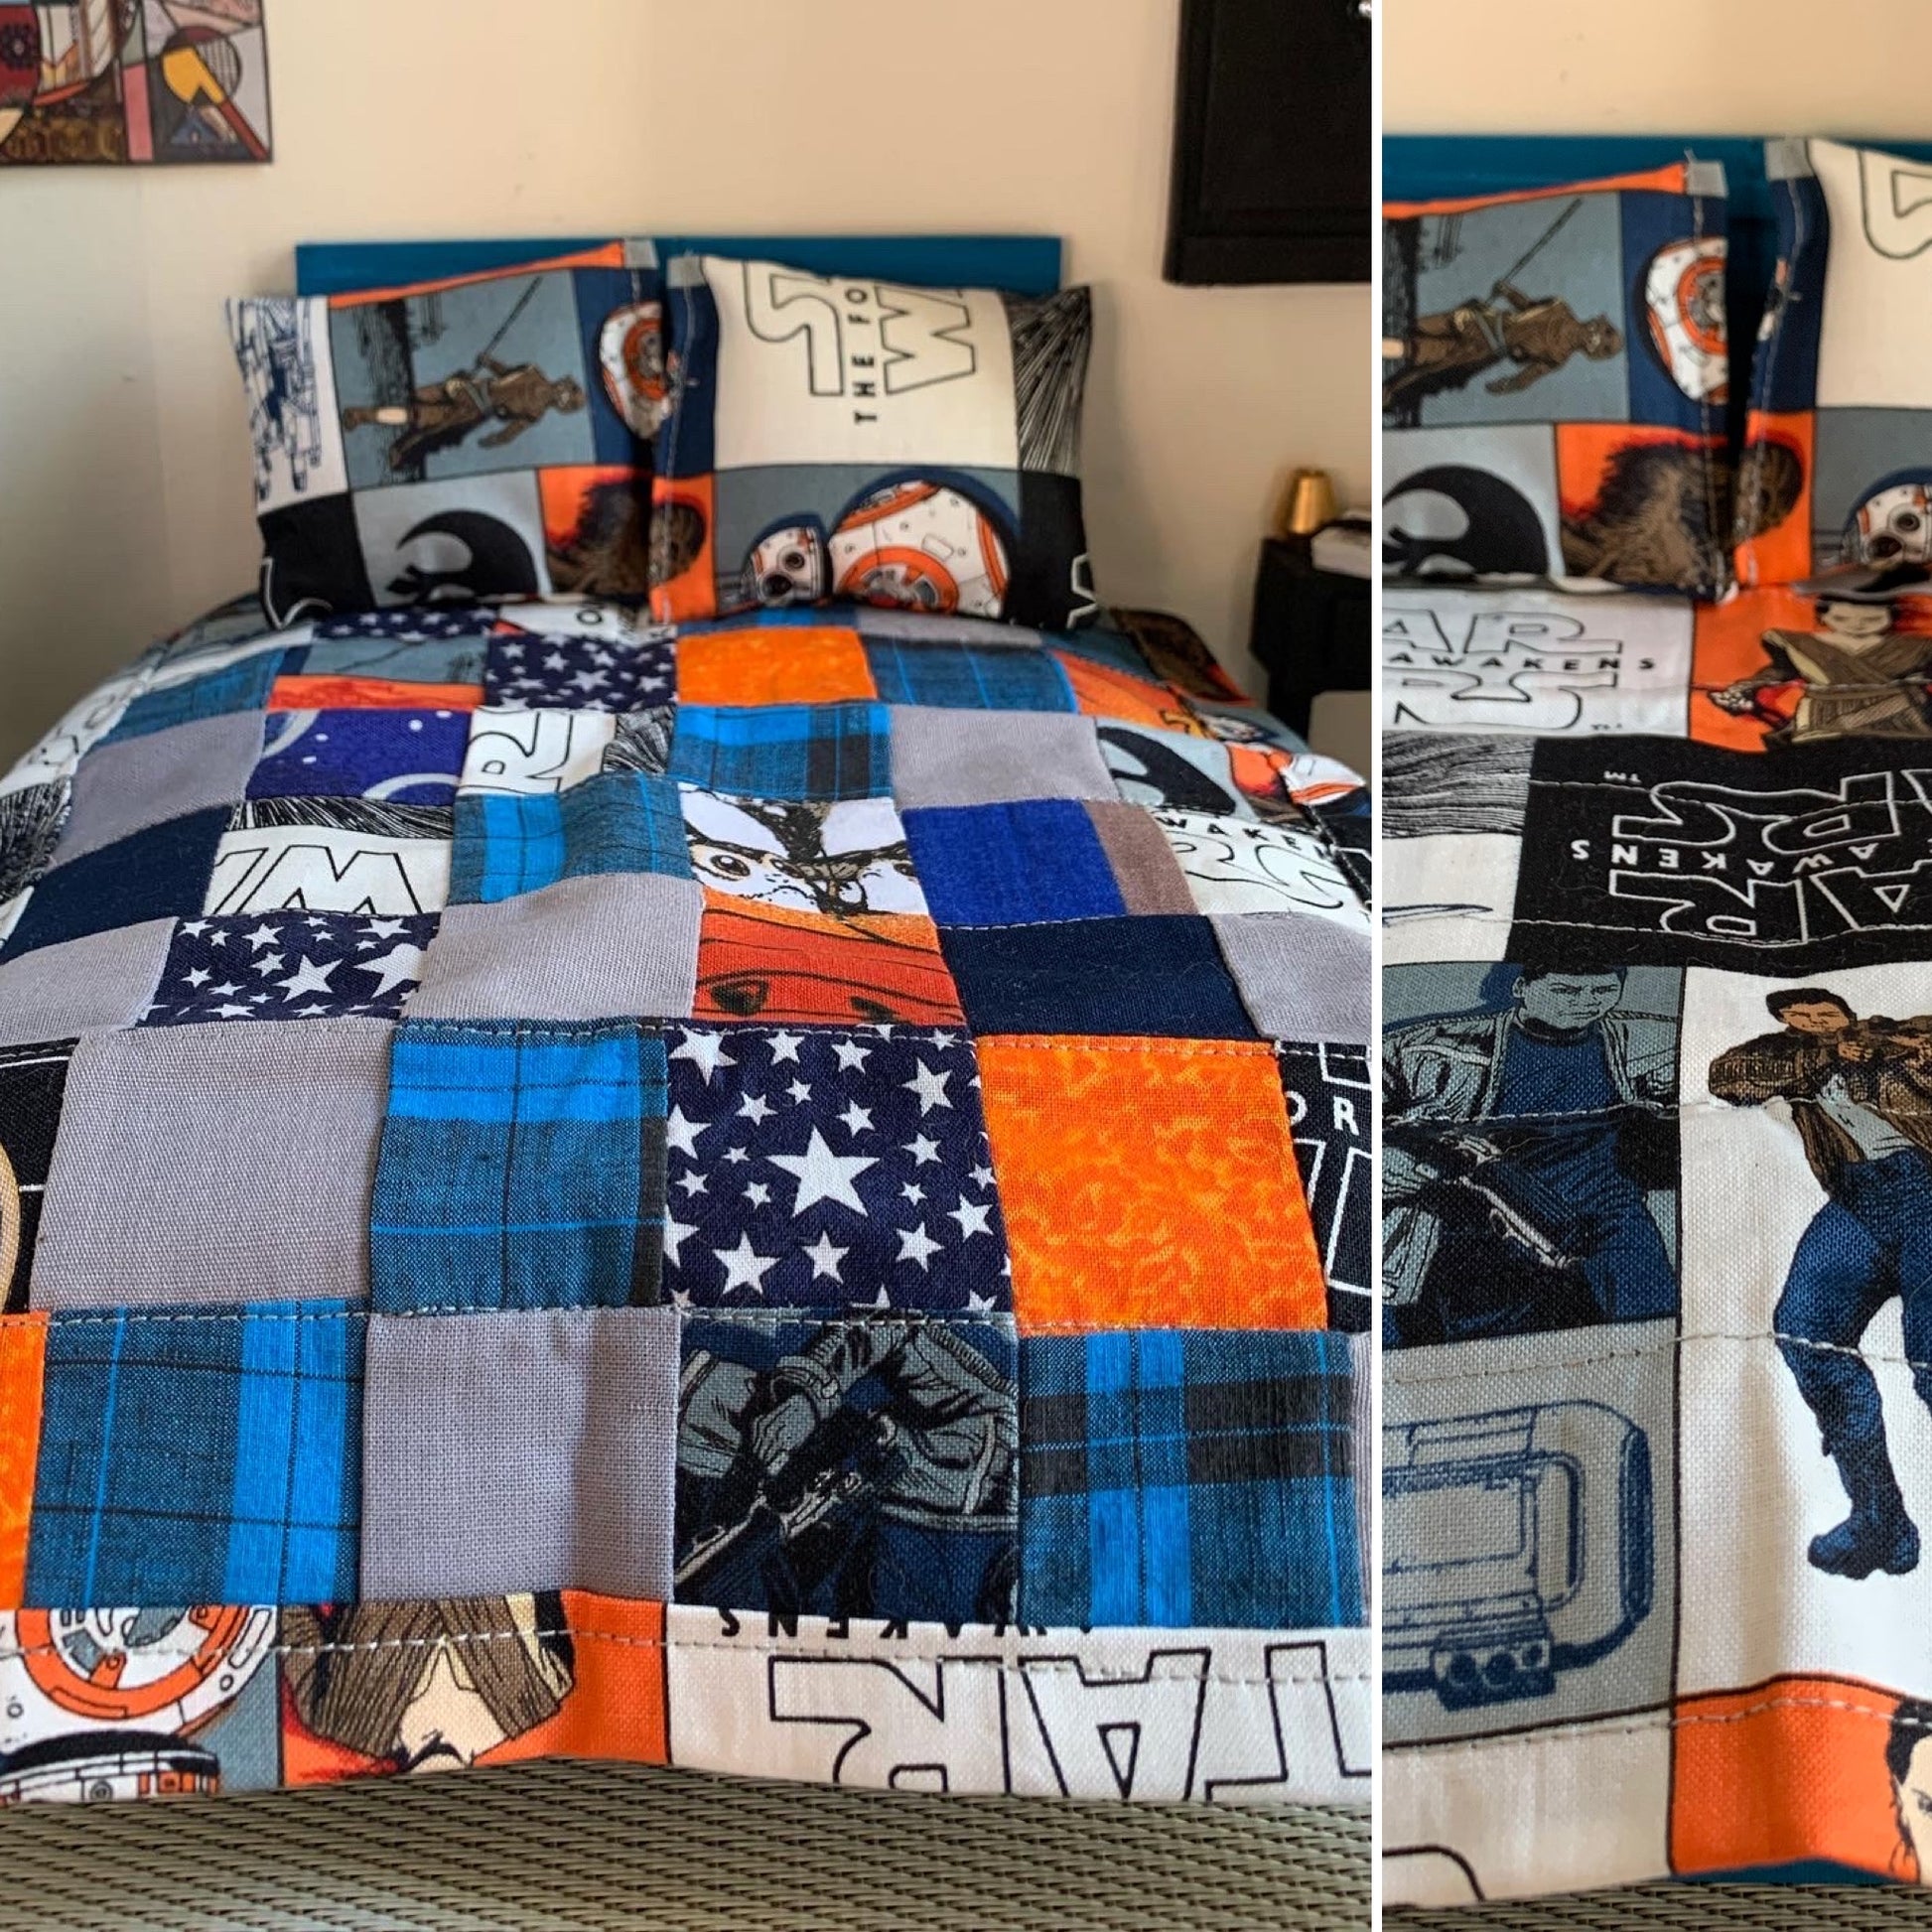 dollhouse quilt star wars fabric, with blues and oranges in a patchwork design